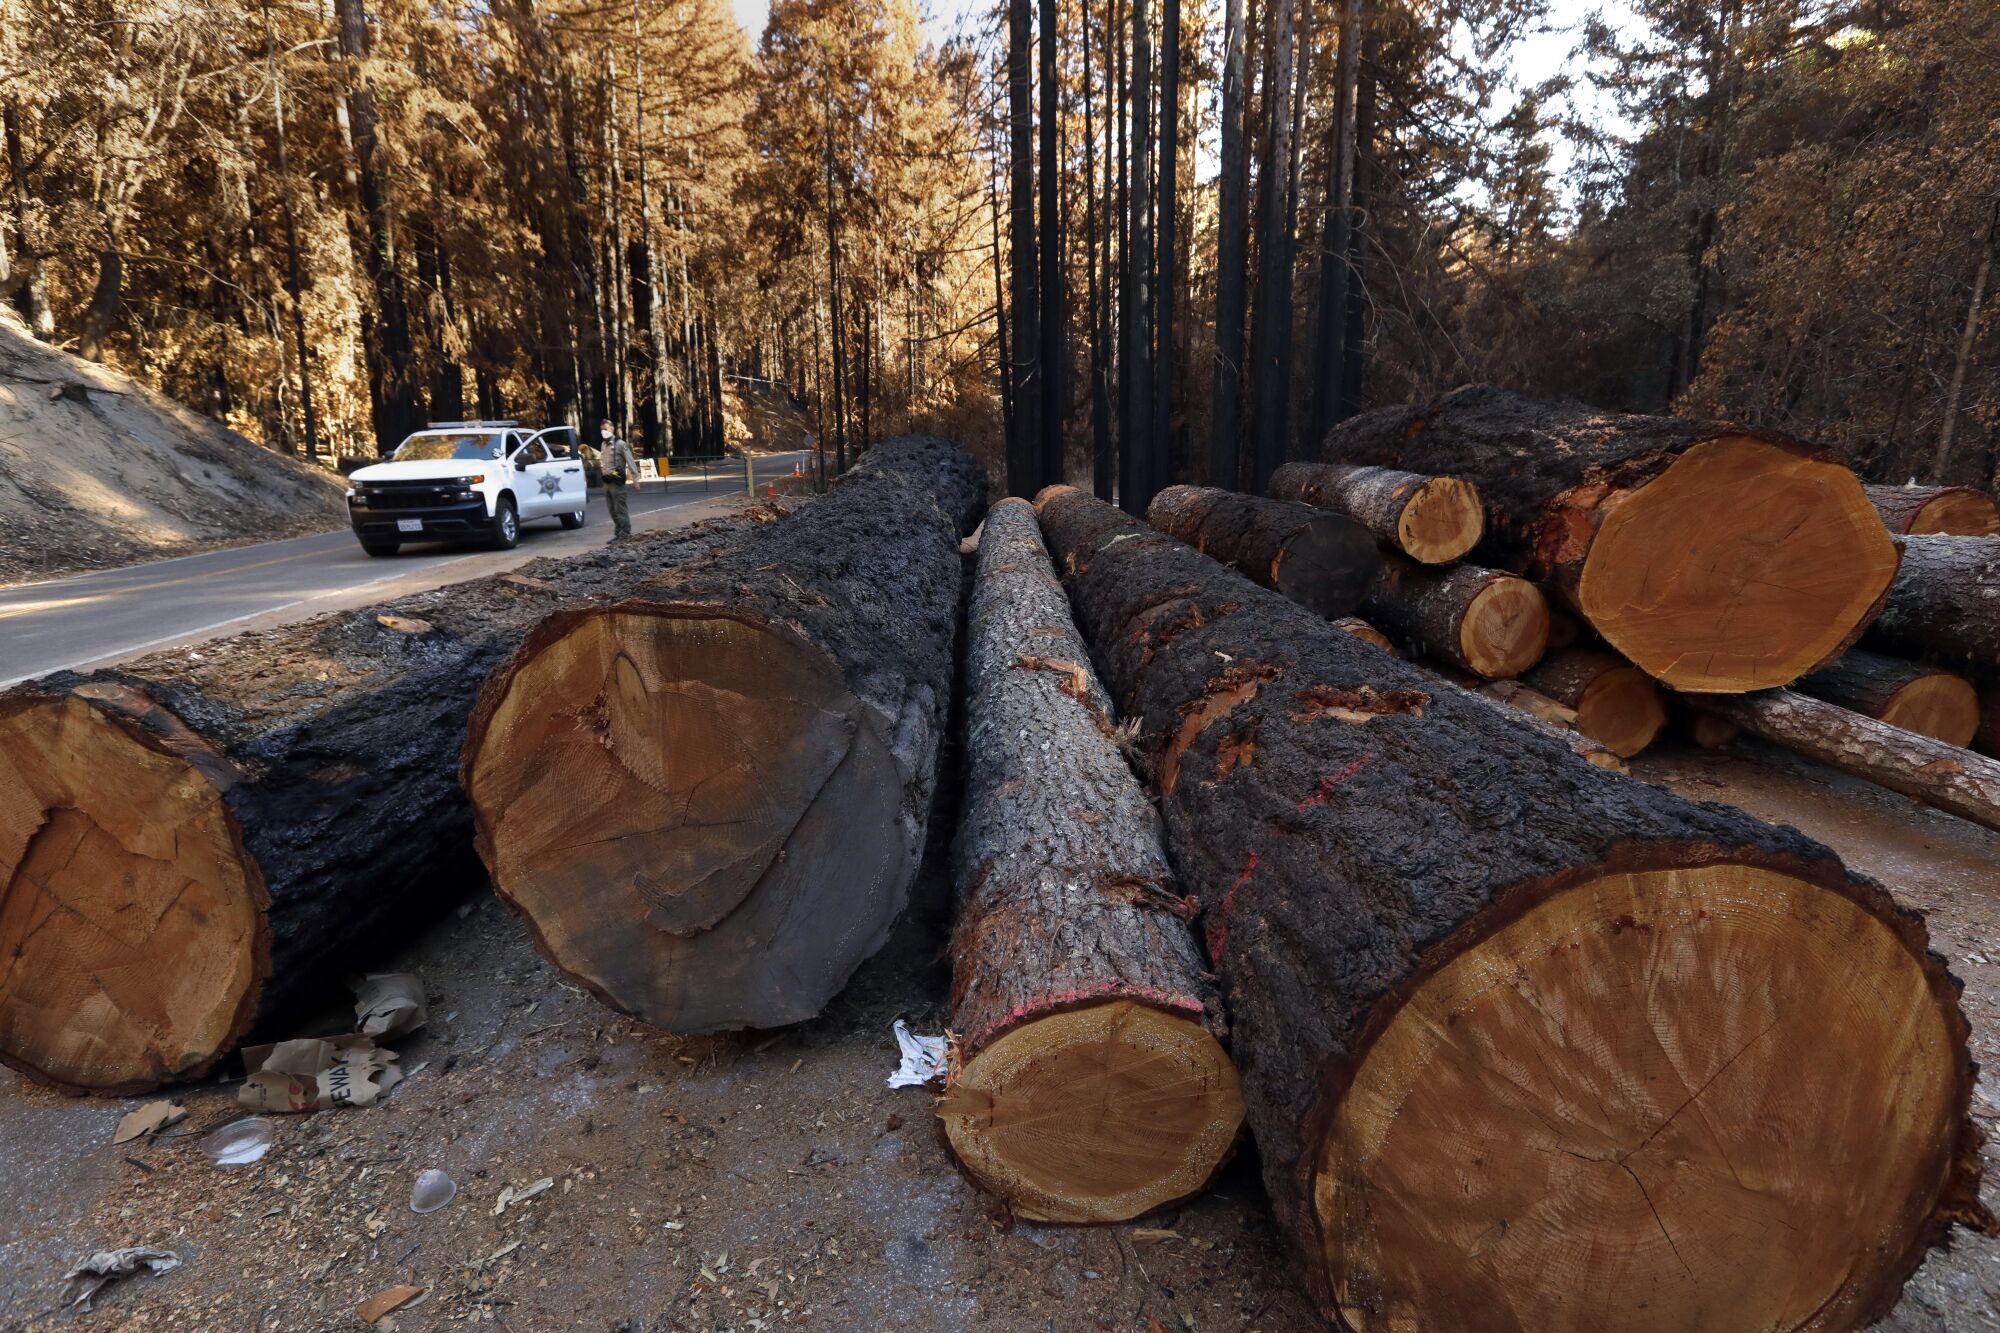 Many of the roadside trees in Big Basin Redwoods State Park are being cut down to prevent danger to visitors.